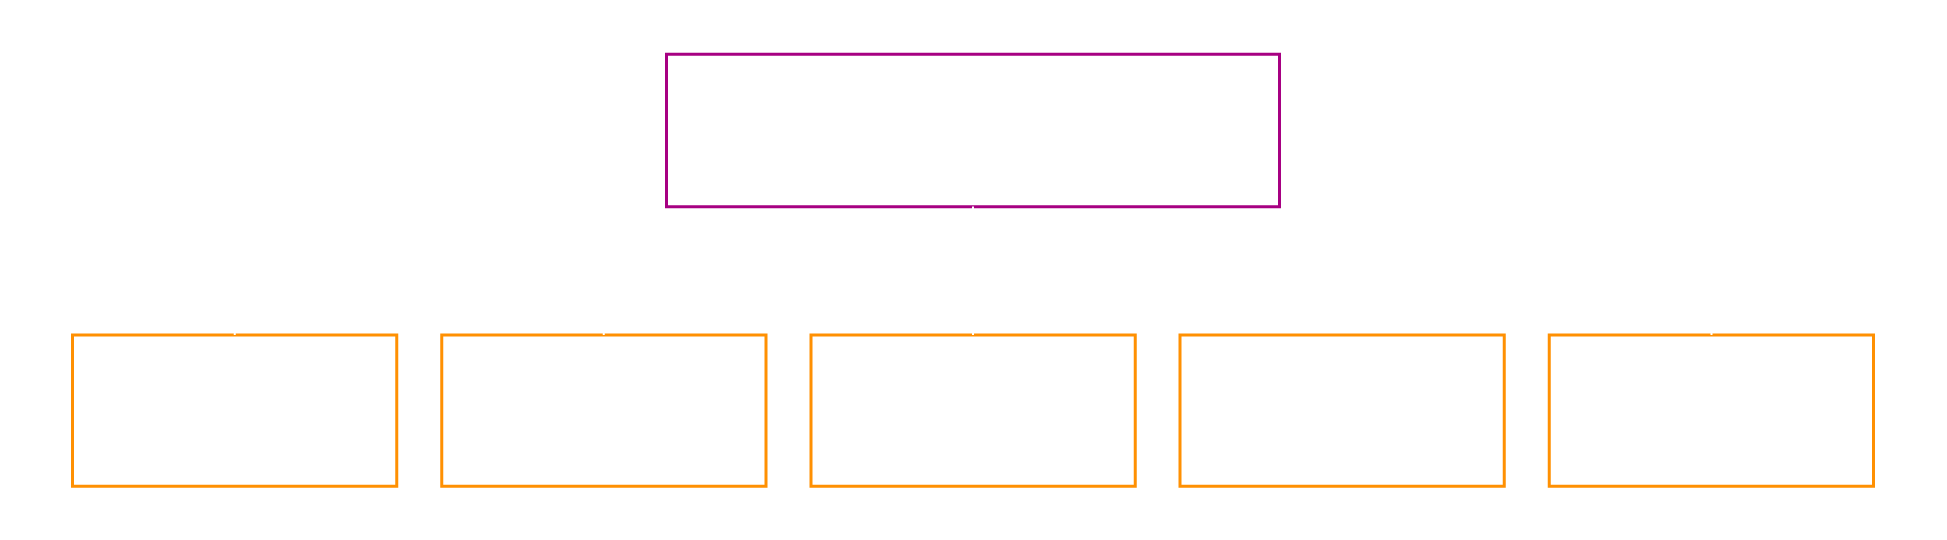 exclusive global deal desk covers sales coordination, trad legal, compliance, tax and financing solution, supply chain logistics, global consulting and professional services, and digital distribution